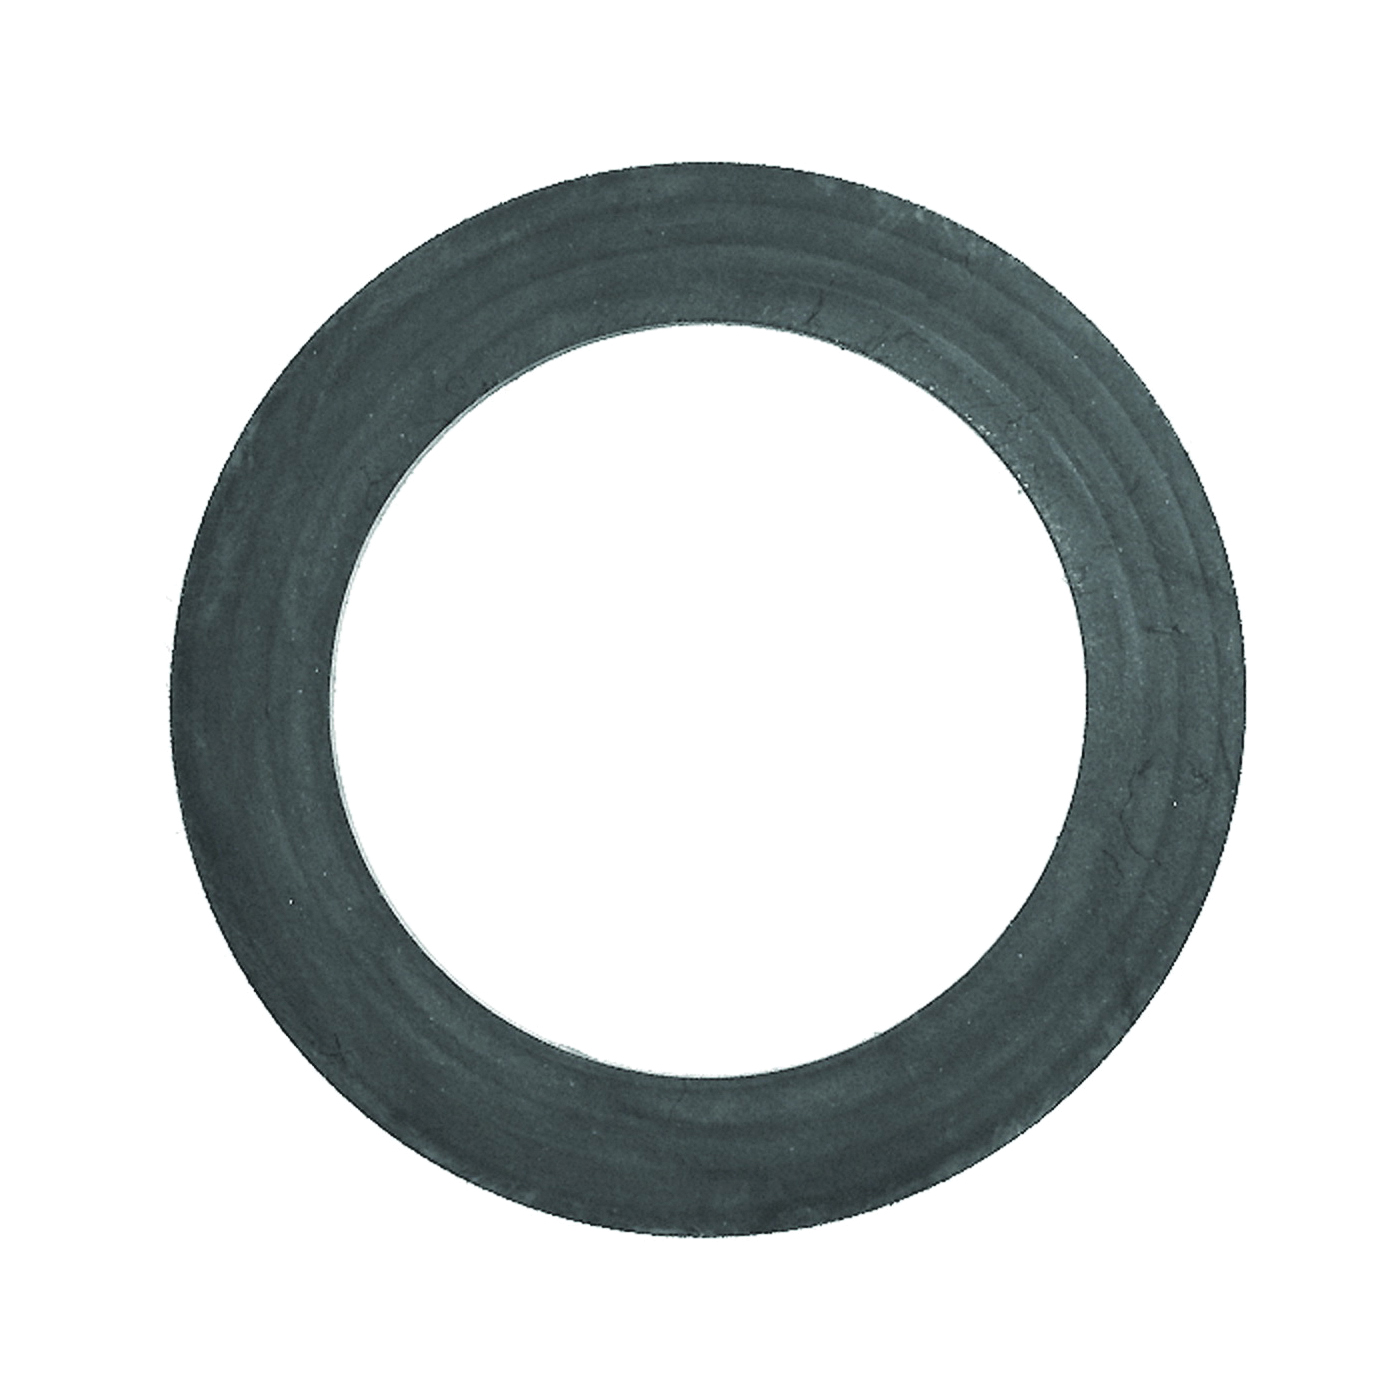 Danco 36647B Faucet Washer, 1-7/32 in ID x 1-23/32 in OD Dia, 3/16 in Thick, Rubber, For: 1-1/4 in Size Tube - 1